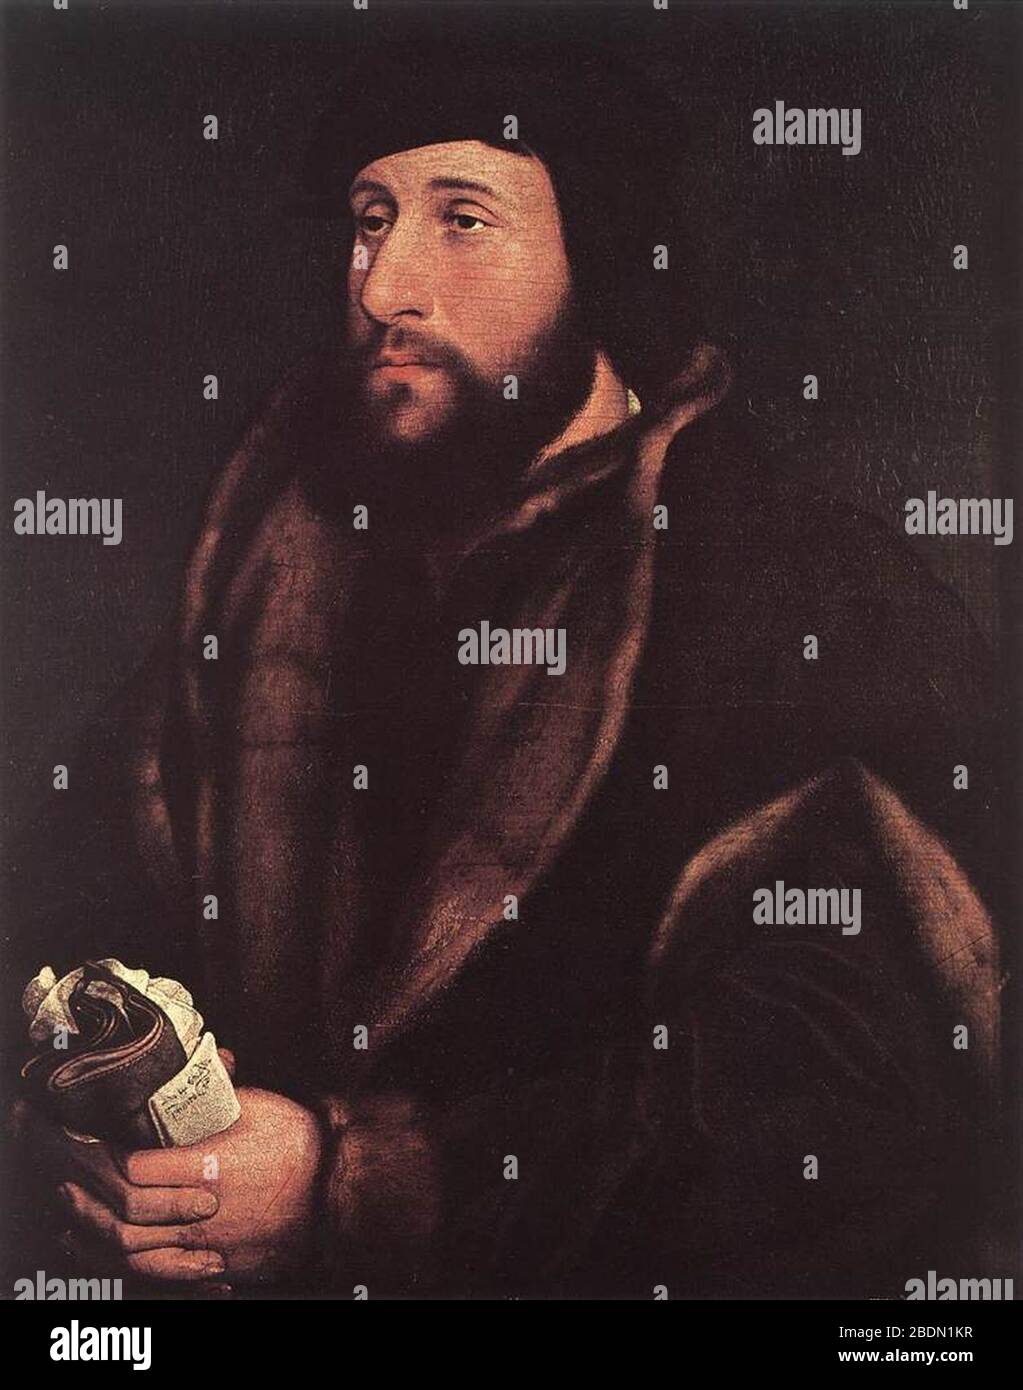 Hans Holbein d. J. - Portrait of a Man Holding Gloves and Letter Stock Photo